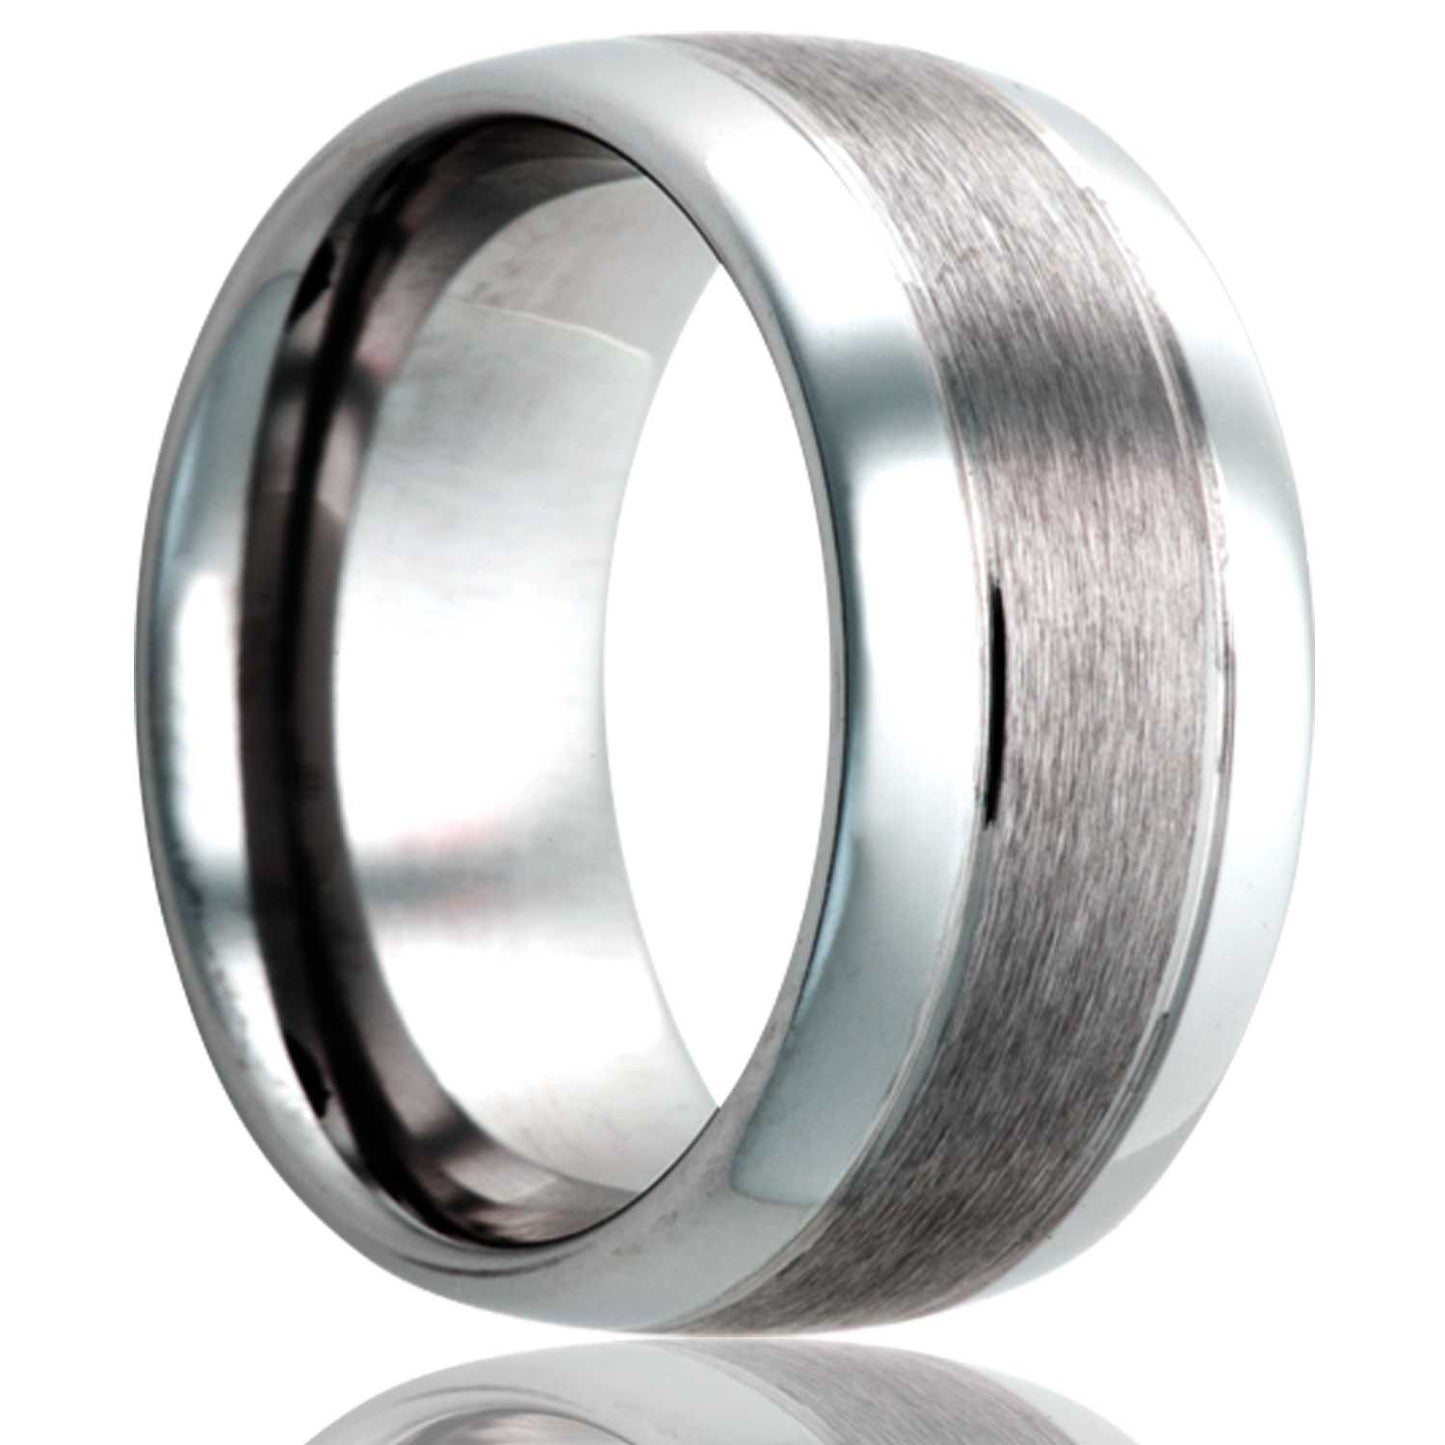 A domed satin finish tungsten wedding band with polished edges displayed on a neutral white background.